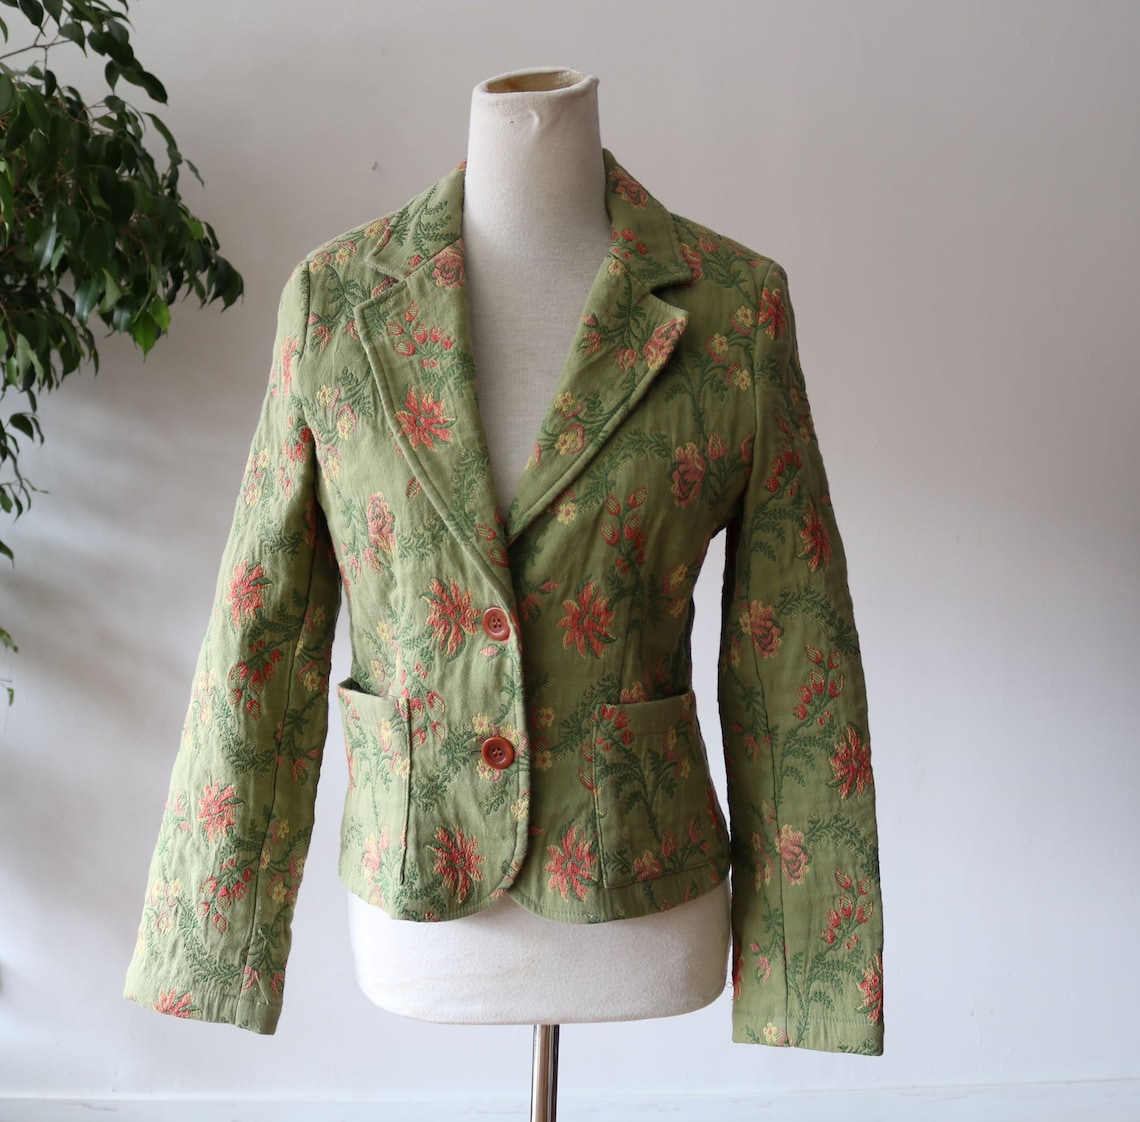 Vintage Women's Floral Blazer Pale Green with Floral | Etsy